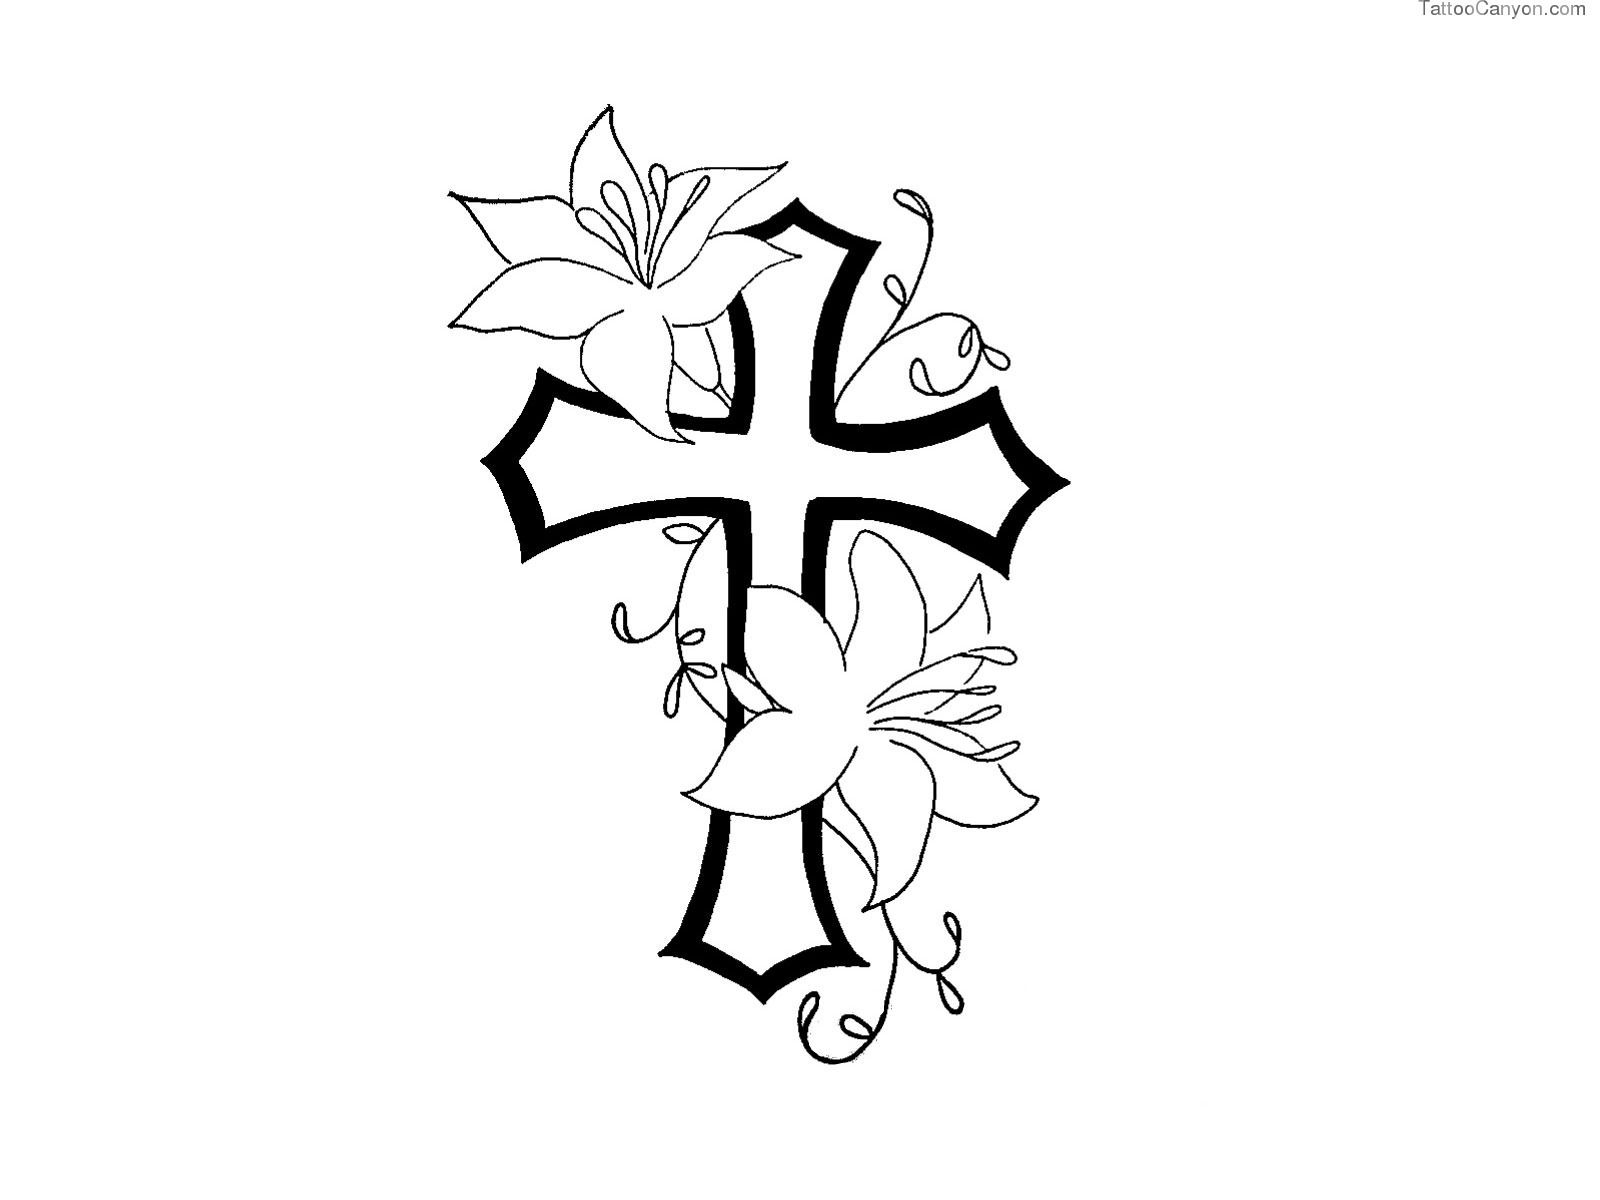 Free Designs Cross With Flower Contour Tattoo Wallpaper Picture in dimensions 1600 X 1200